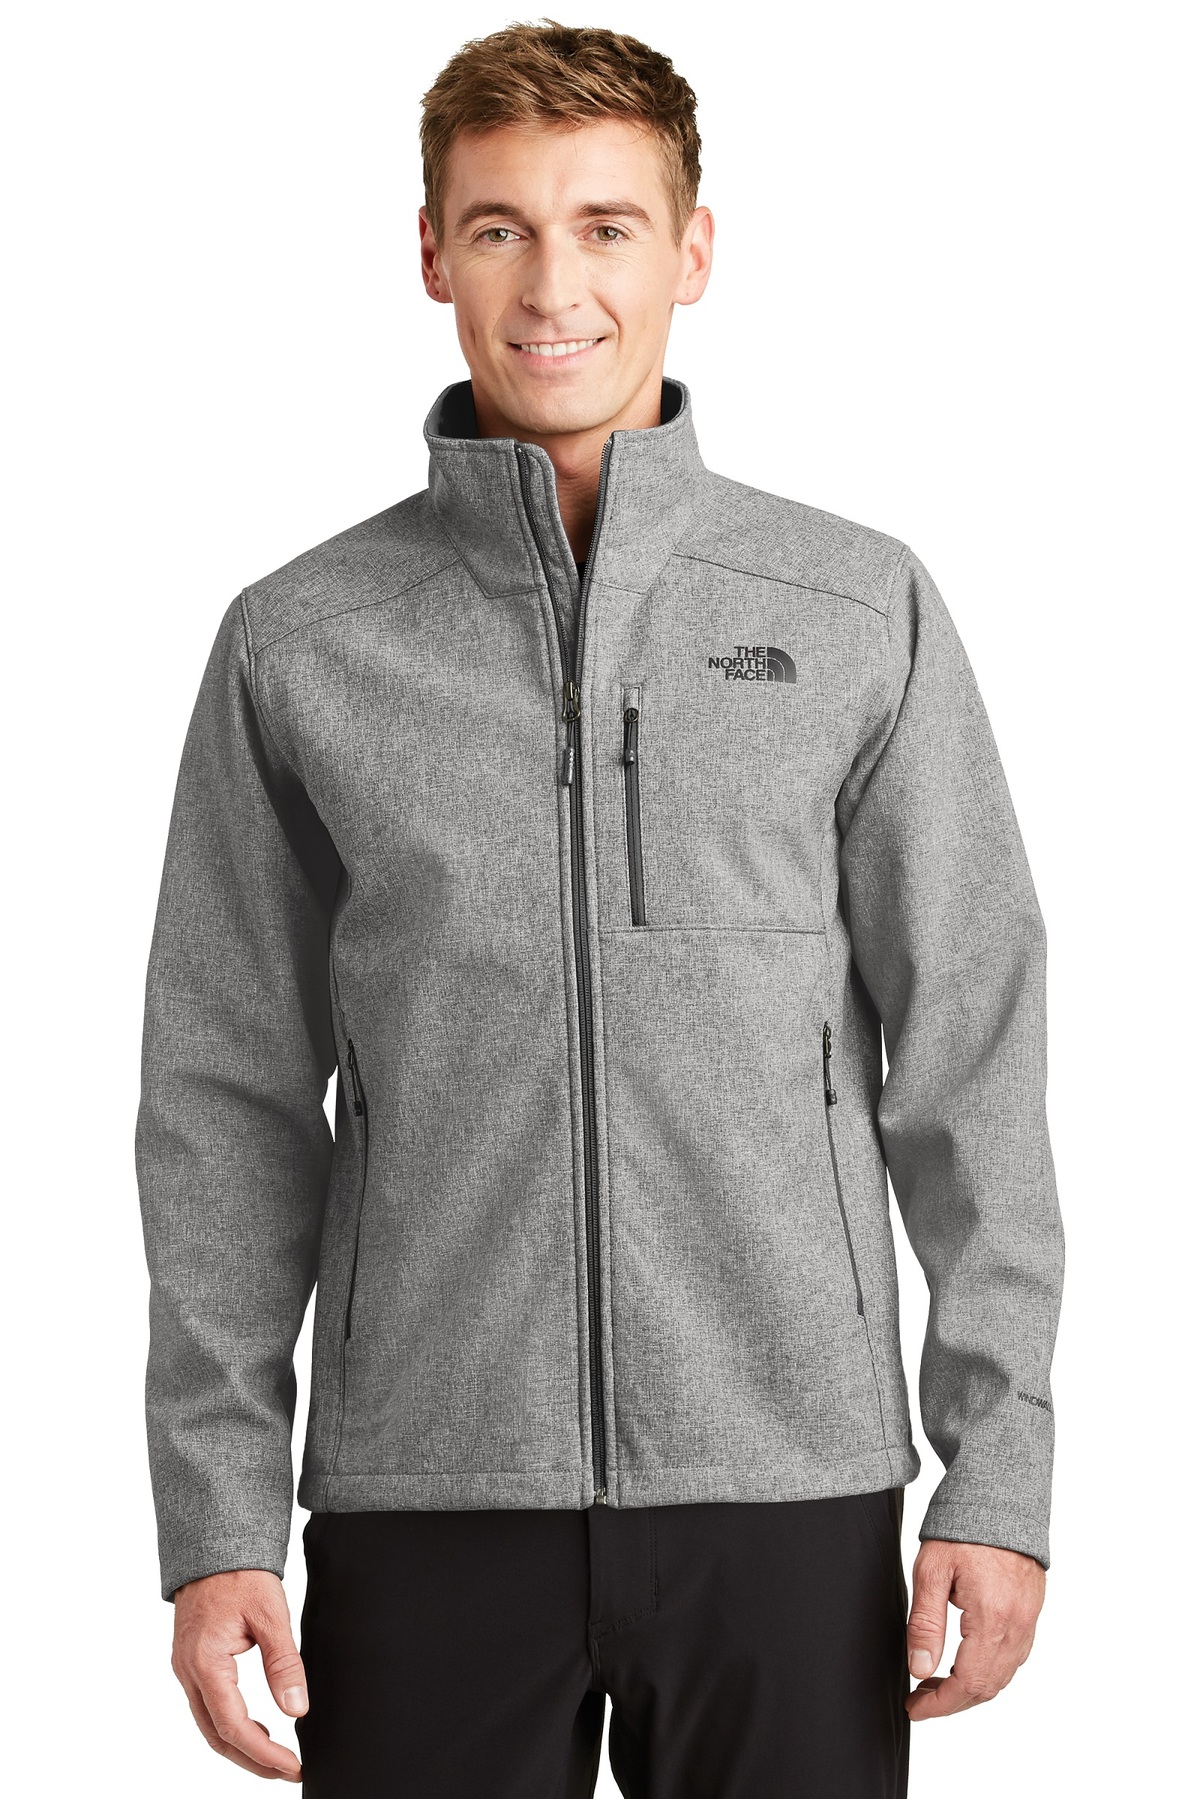 The North Face Embroidered Men's Apex Barrier Soft Shell Jacket | The ...